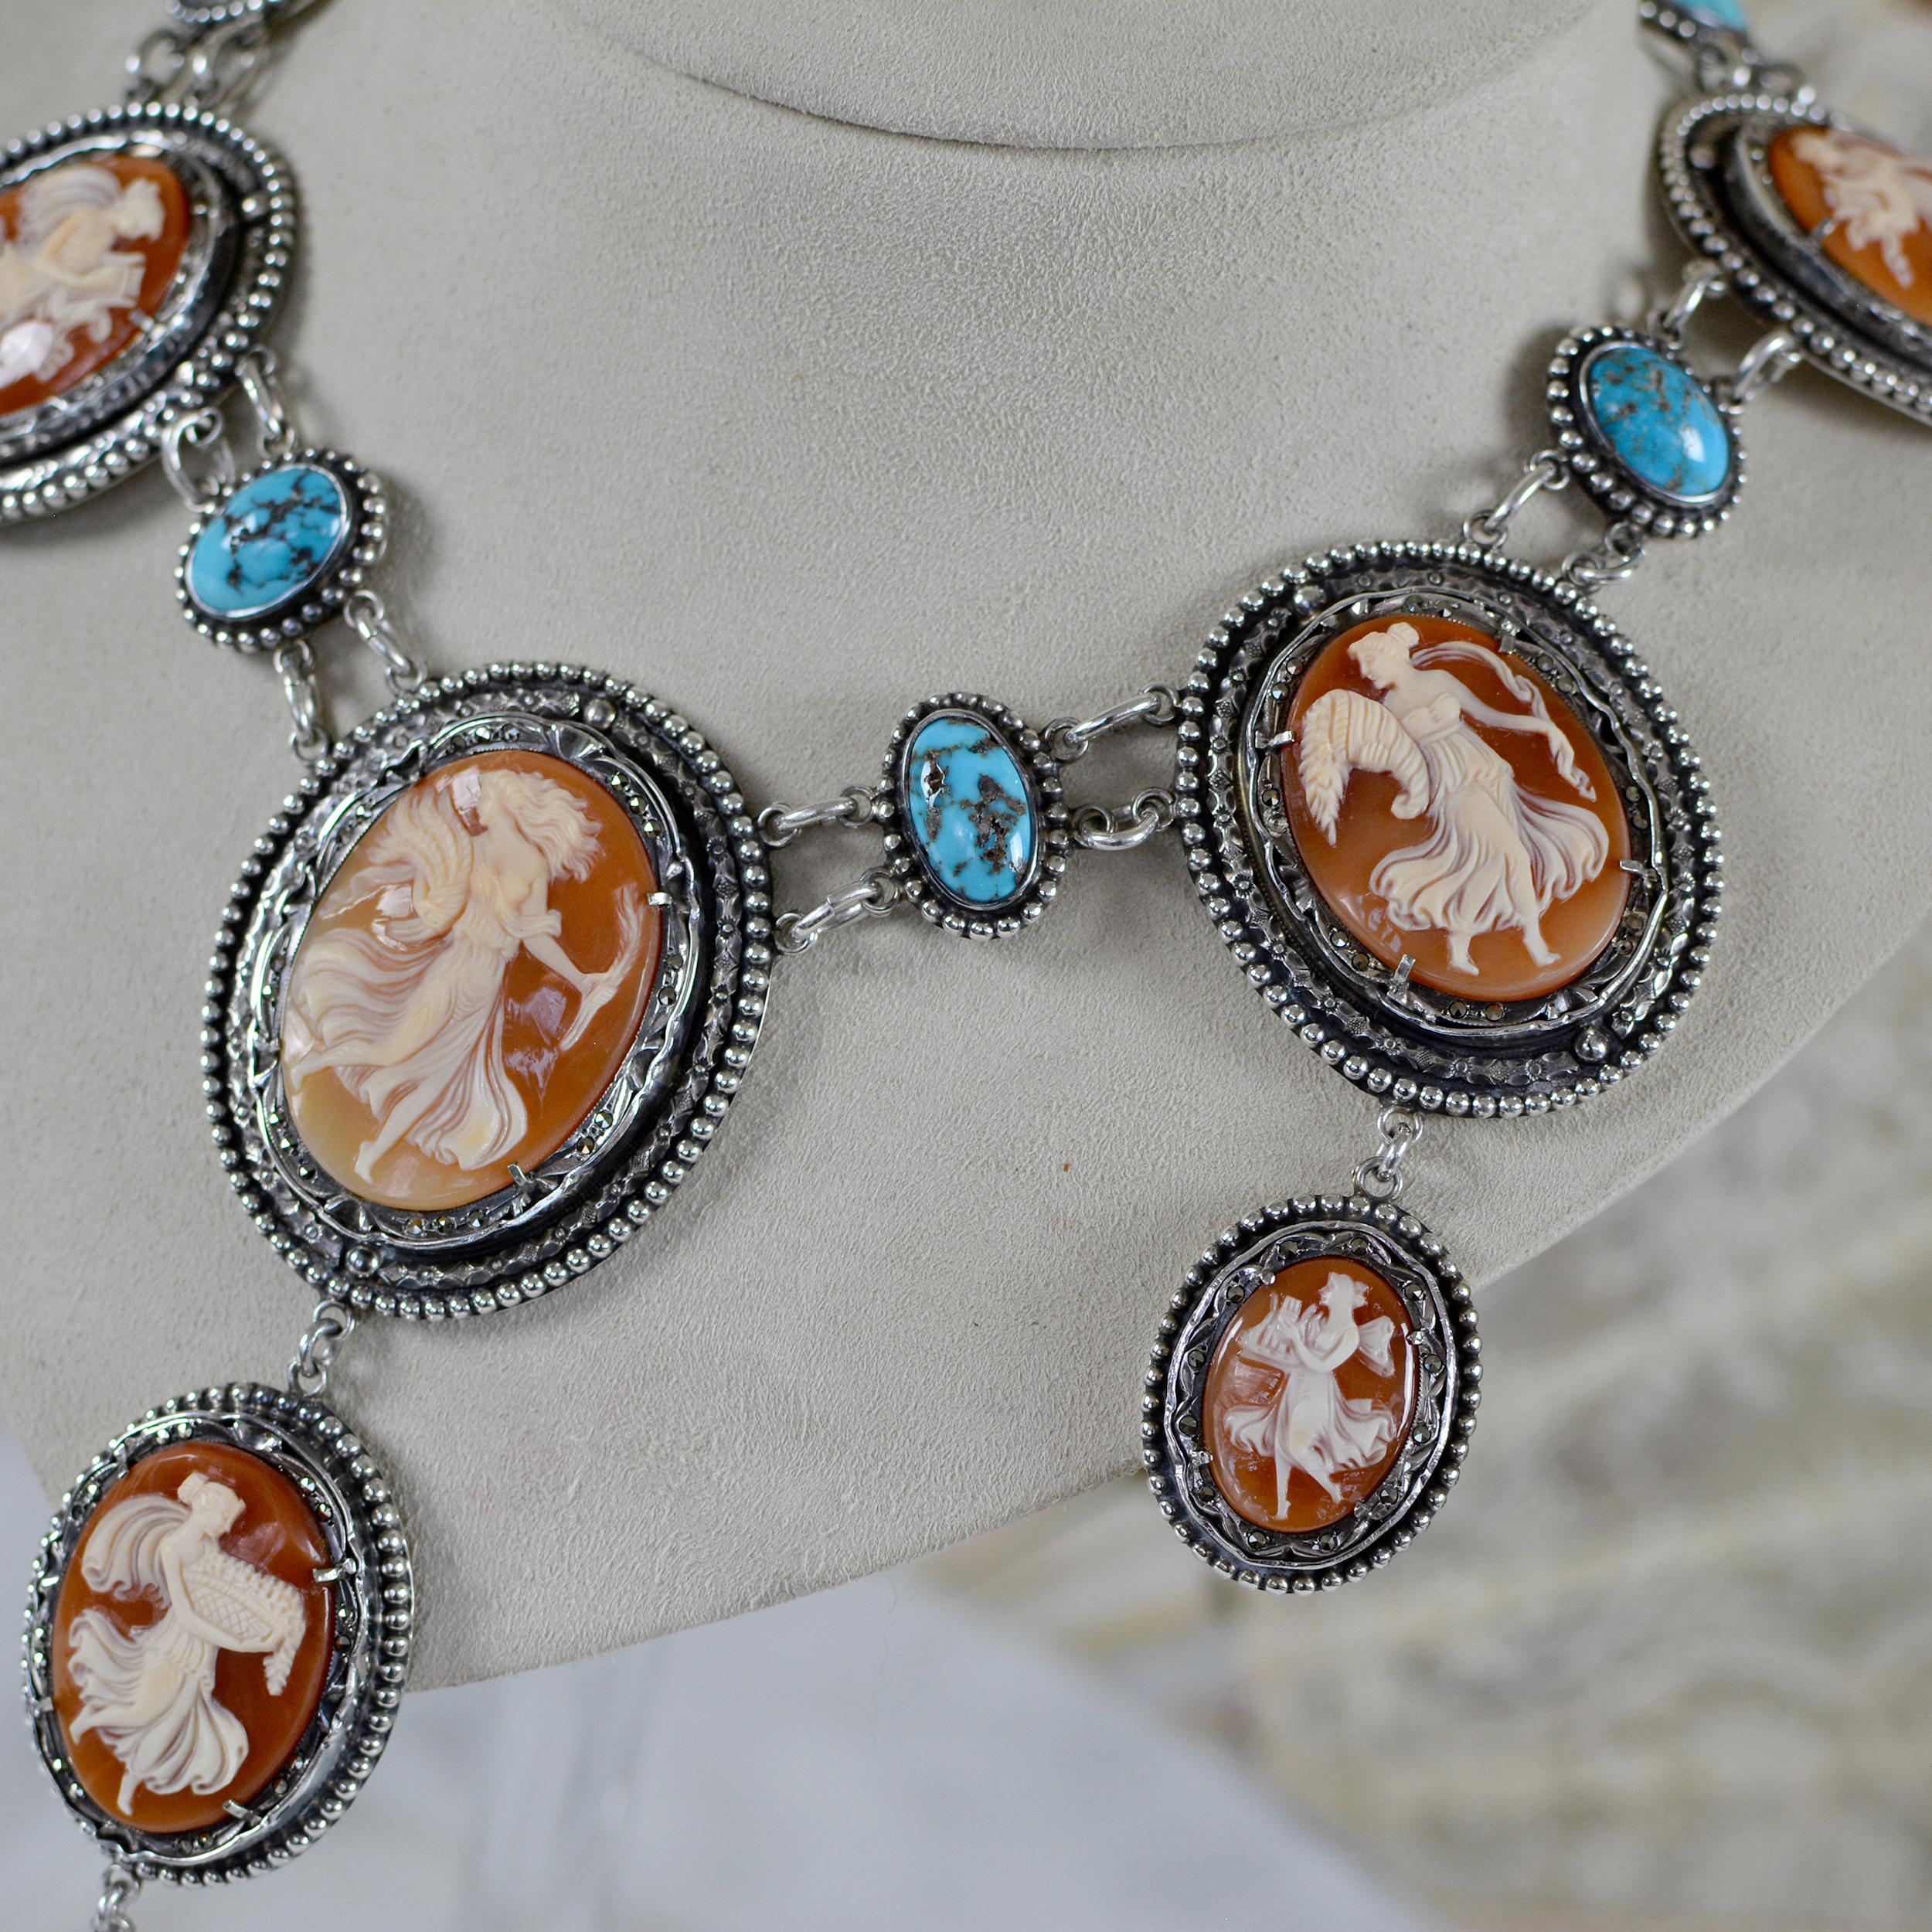 Jill Garber 19th. C. Terpsichore Cameo Suite Necklace with Persian Turquoise  For Sale 1